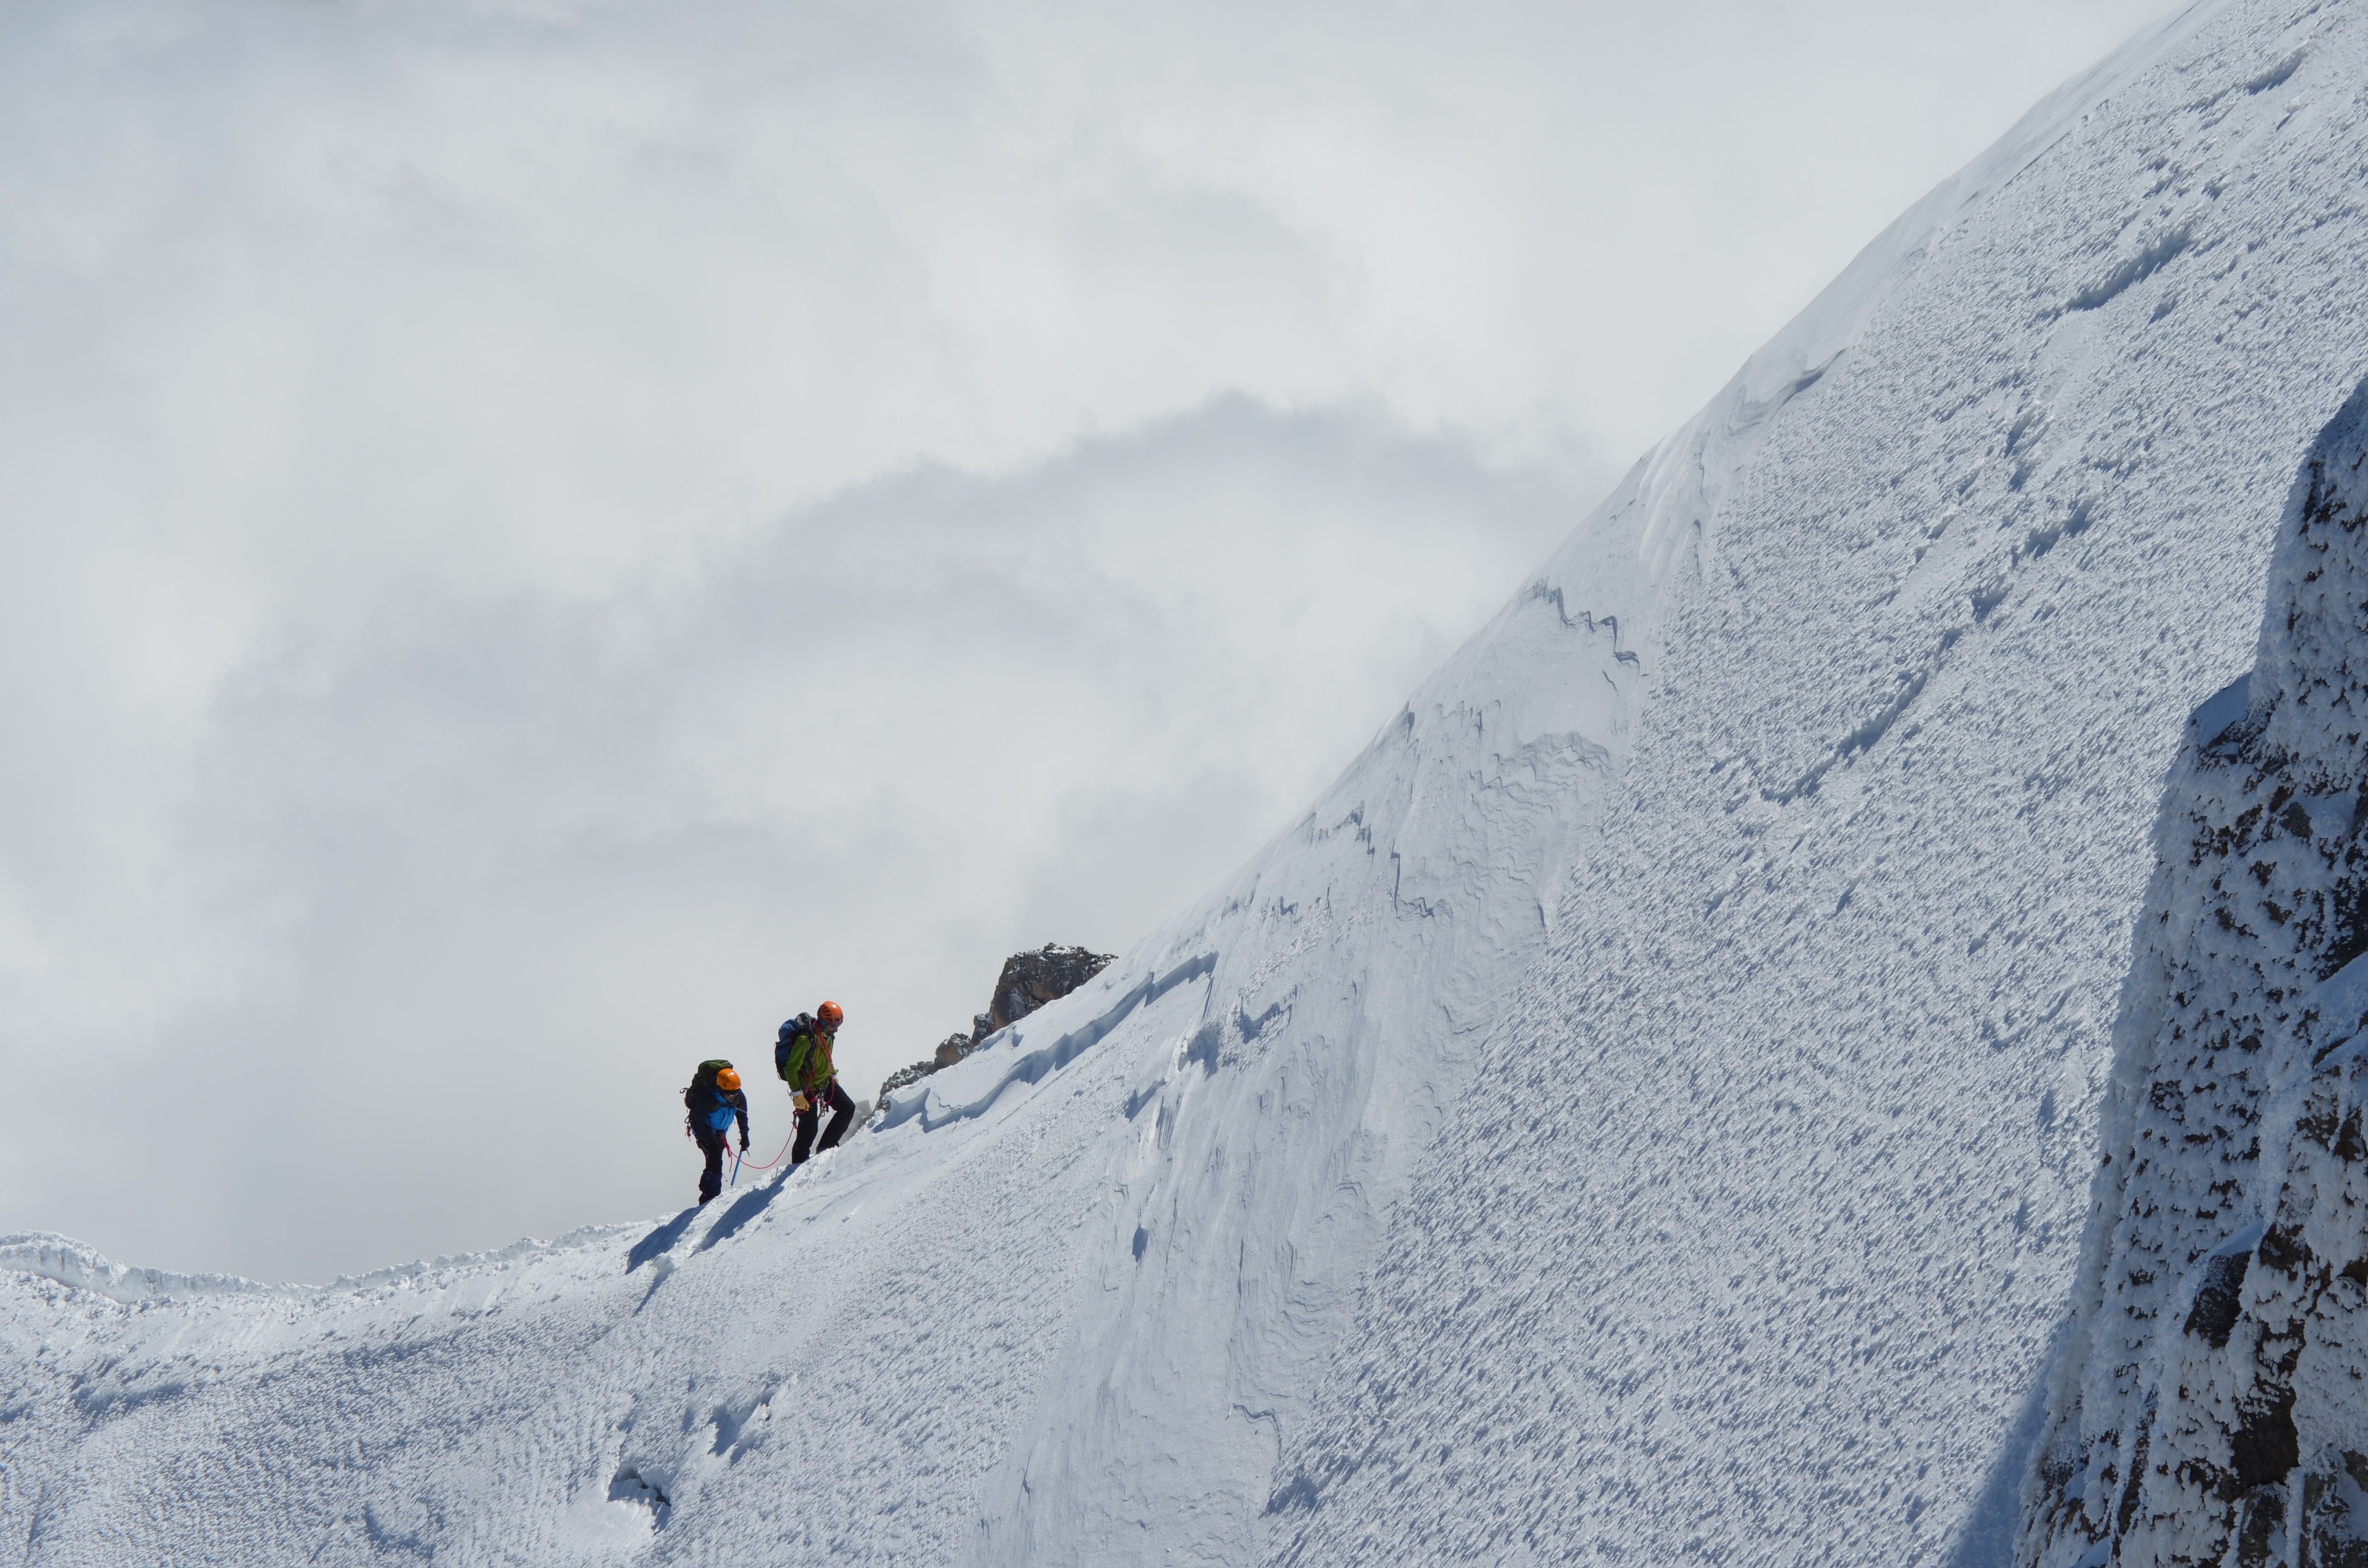 Mountaineers climbing up a snowcapped mountain